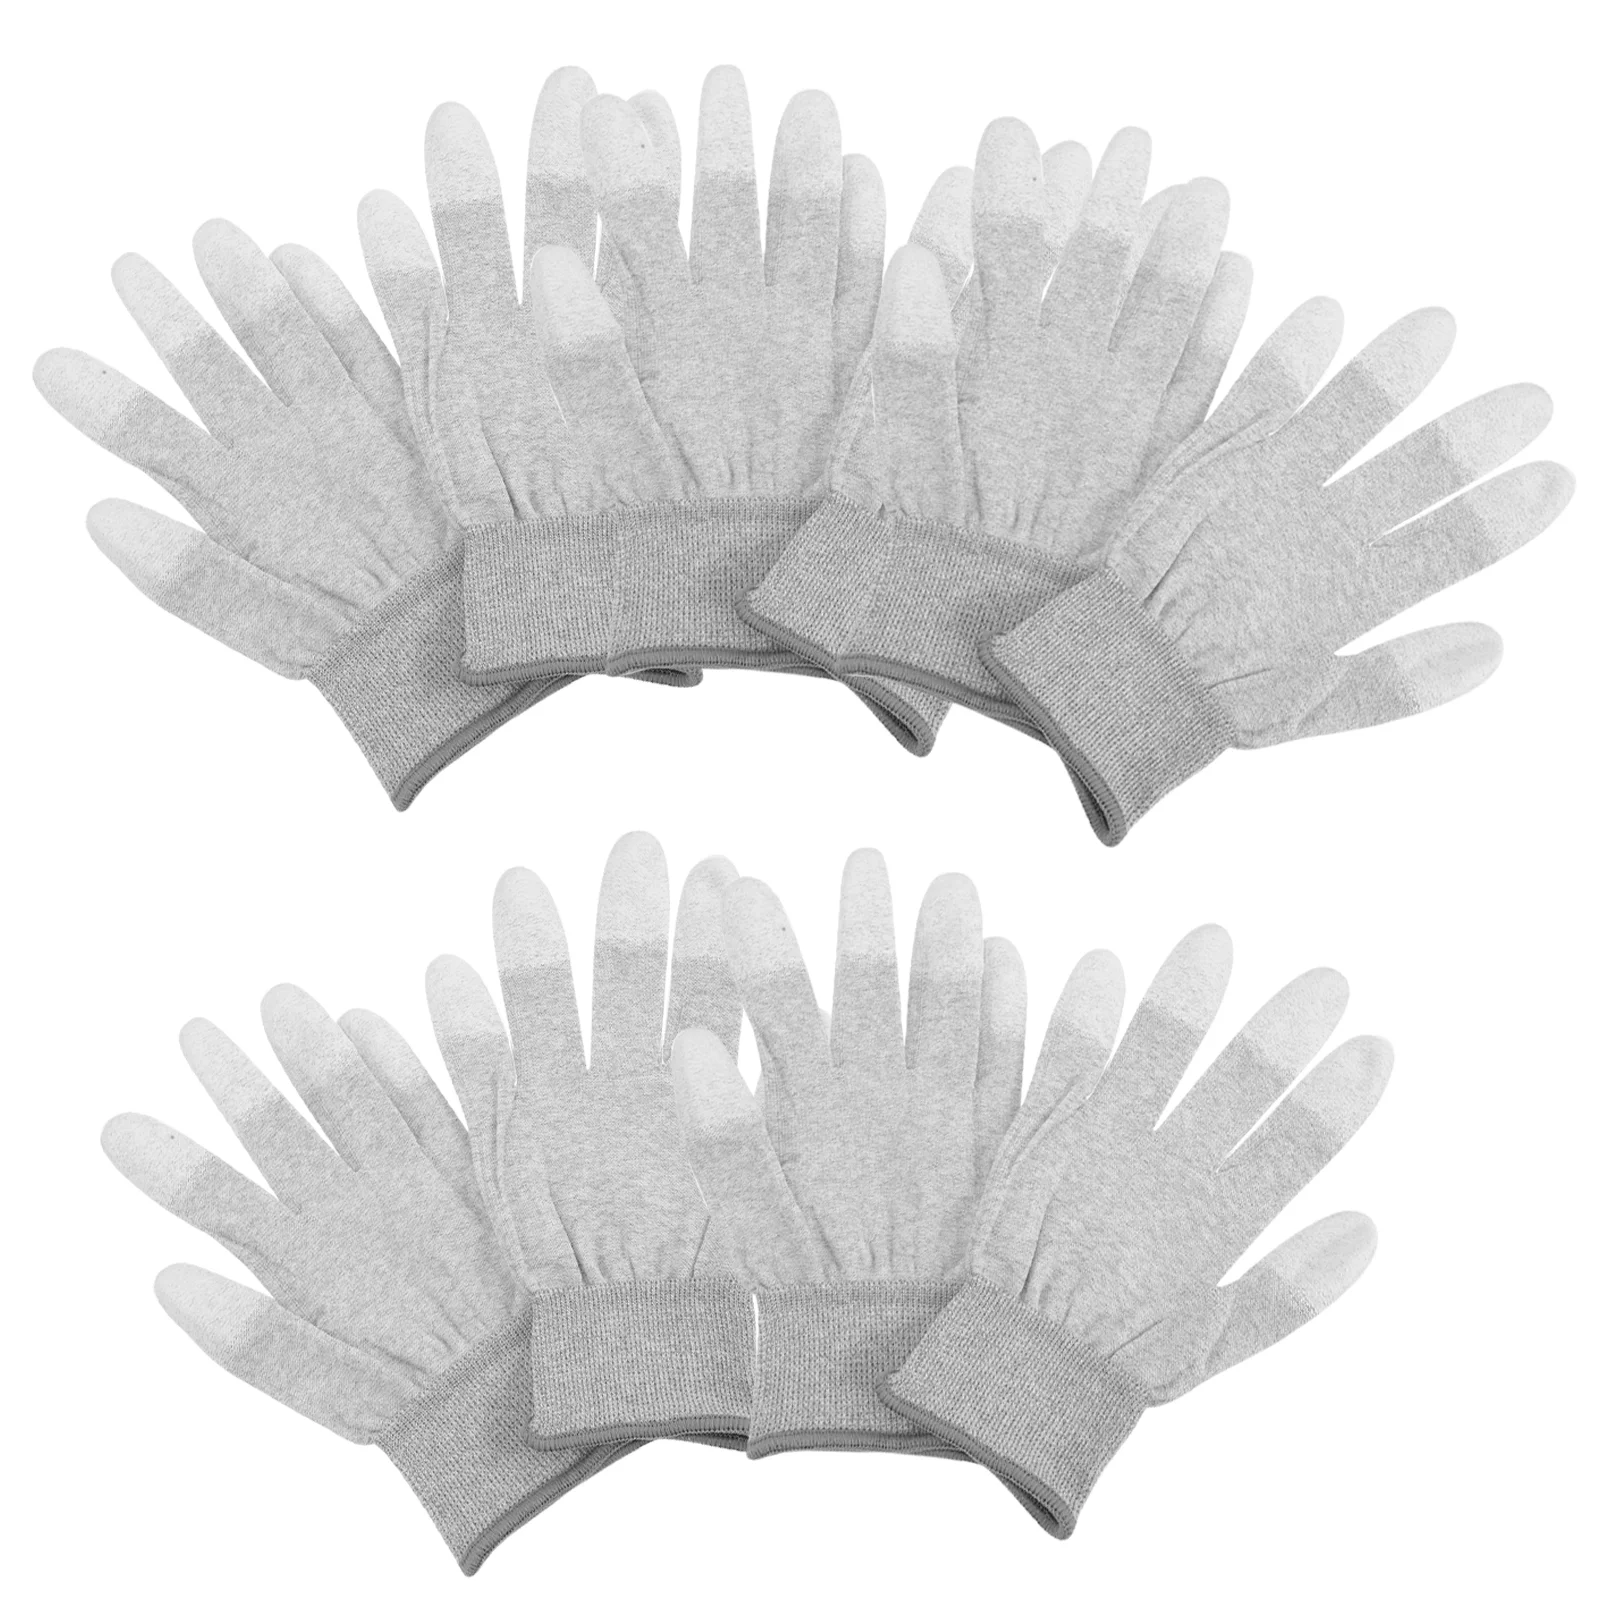 

5 Pairs Anti-static Gloves Anti-slip Coated Working Gloves for Industry Precision Work